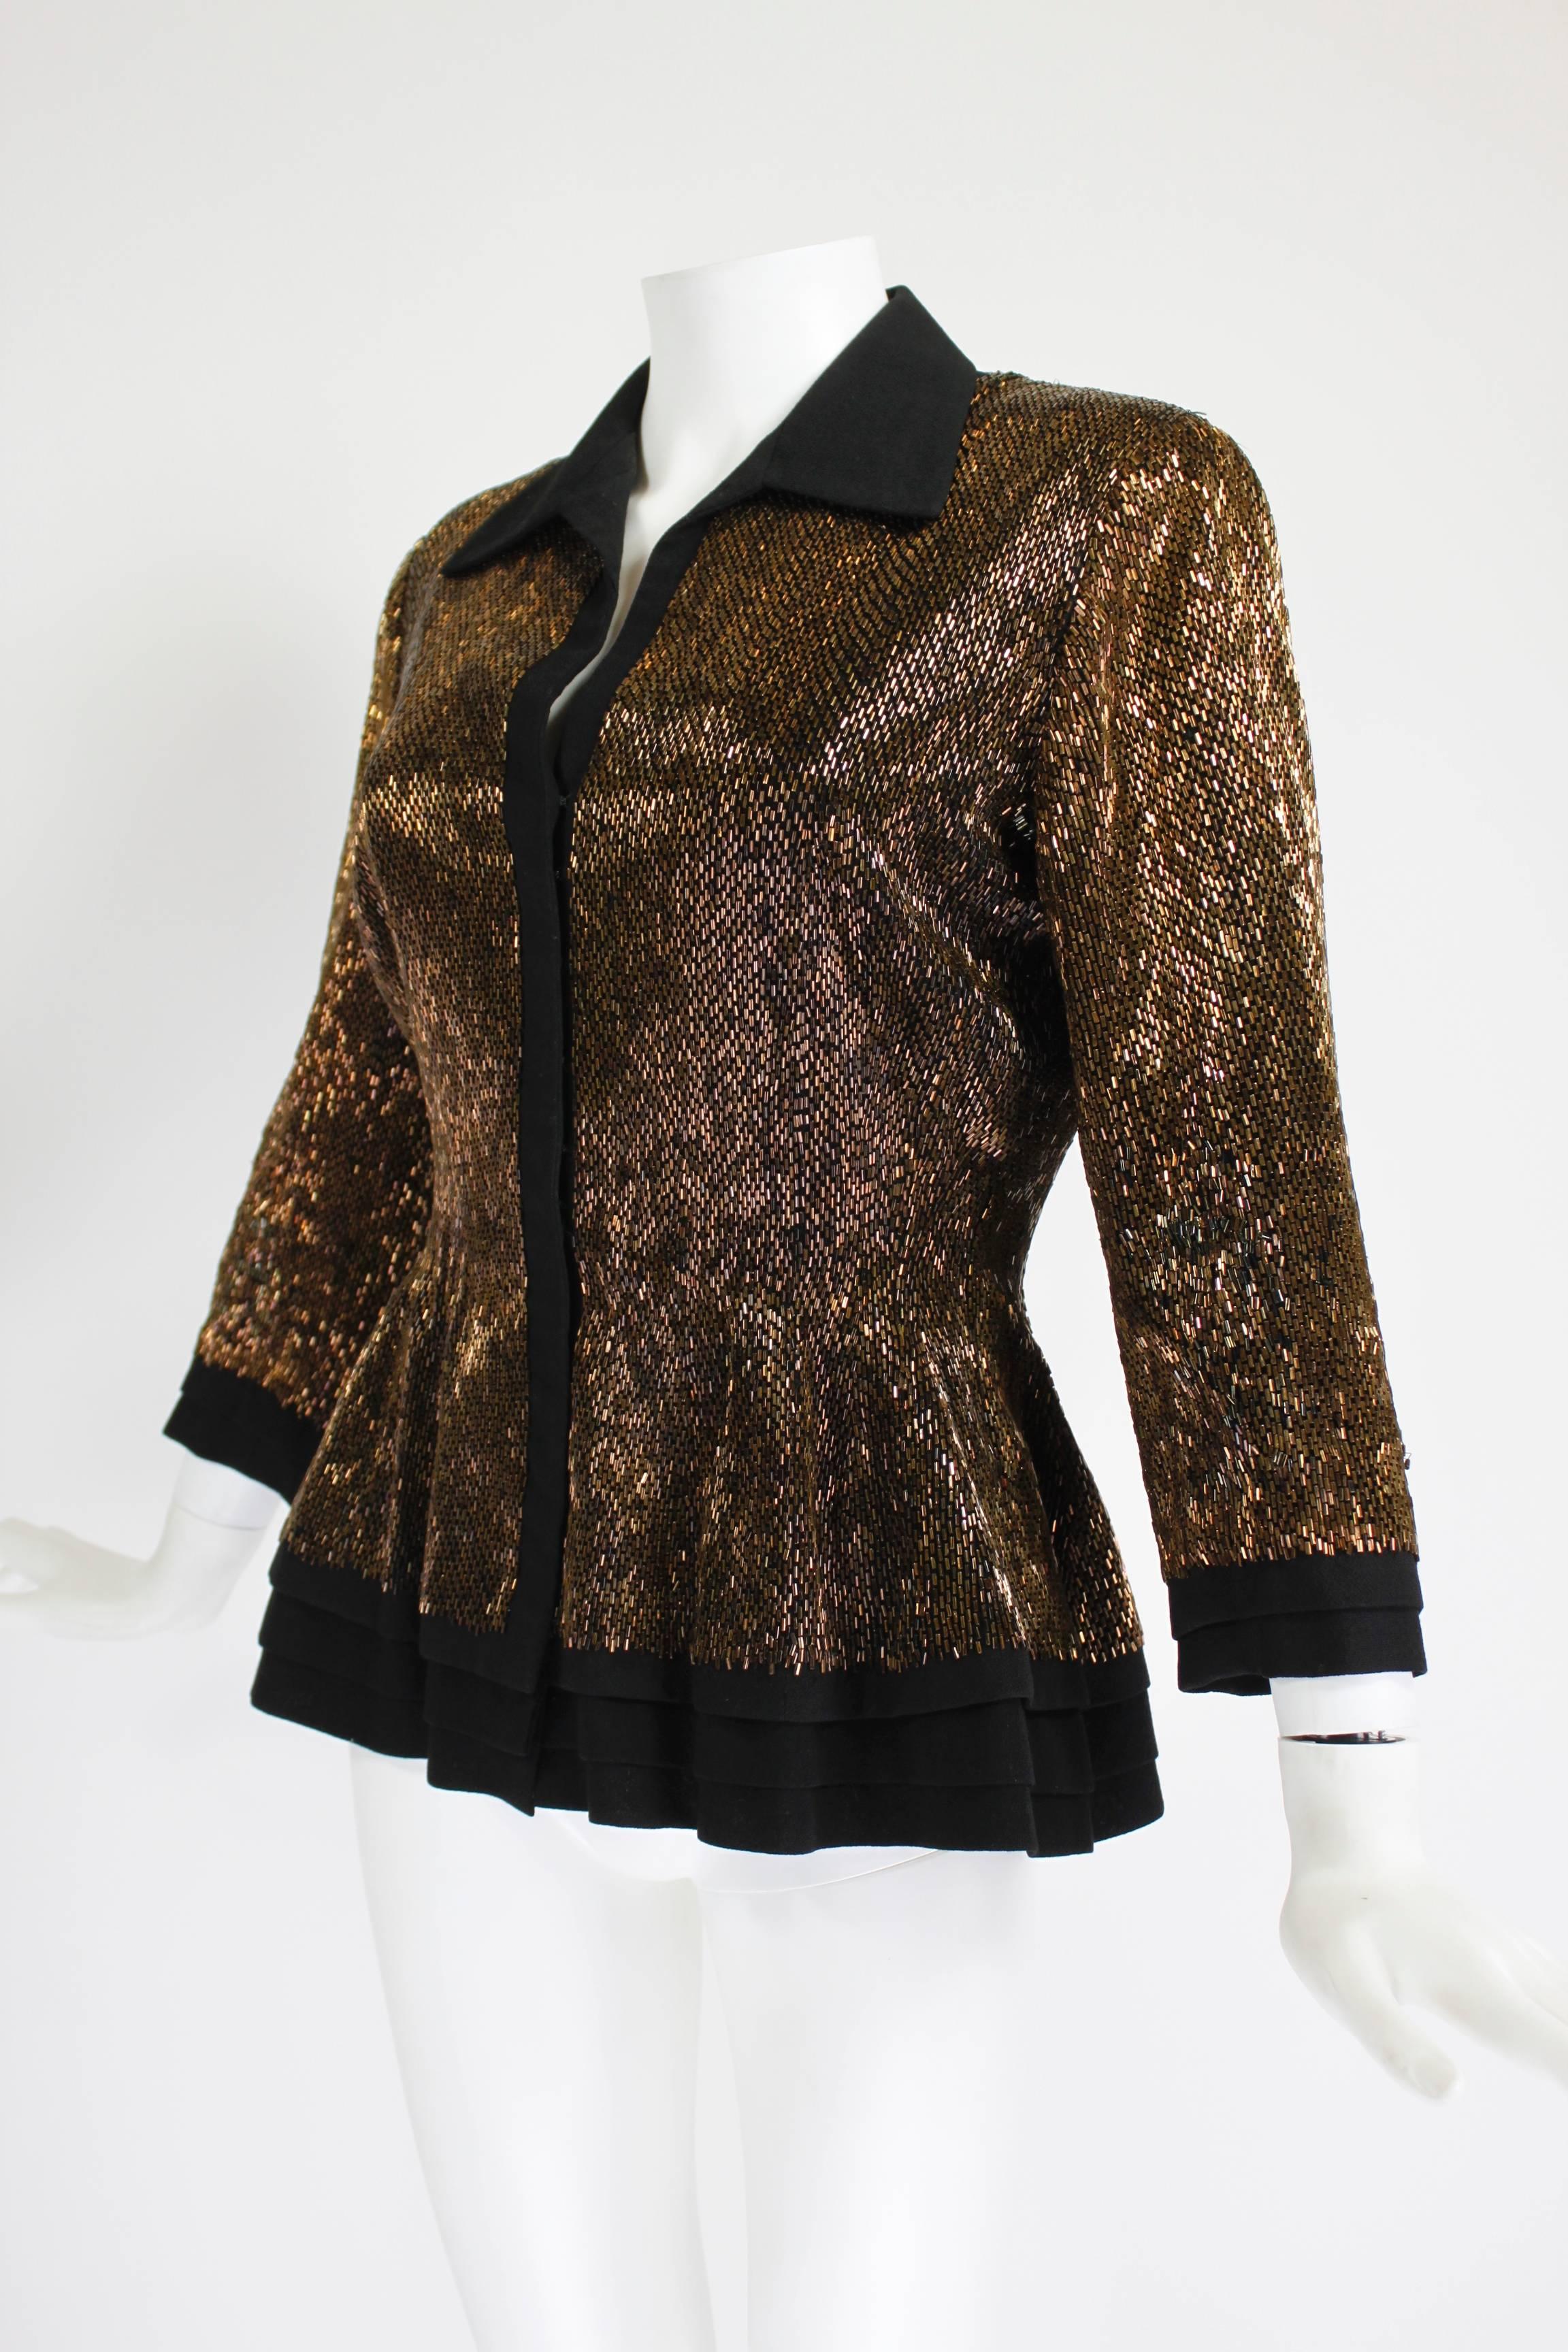 This gorgeous jacket from Balmain Haute Couture features a sexy, tiered peplum silhouette, three-quarter length sleeves, and an open collar. Luxurious wool is covered in iridescent, rich brown bugle beads. The front zipper is hidden with hook and